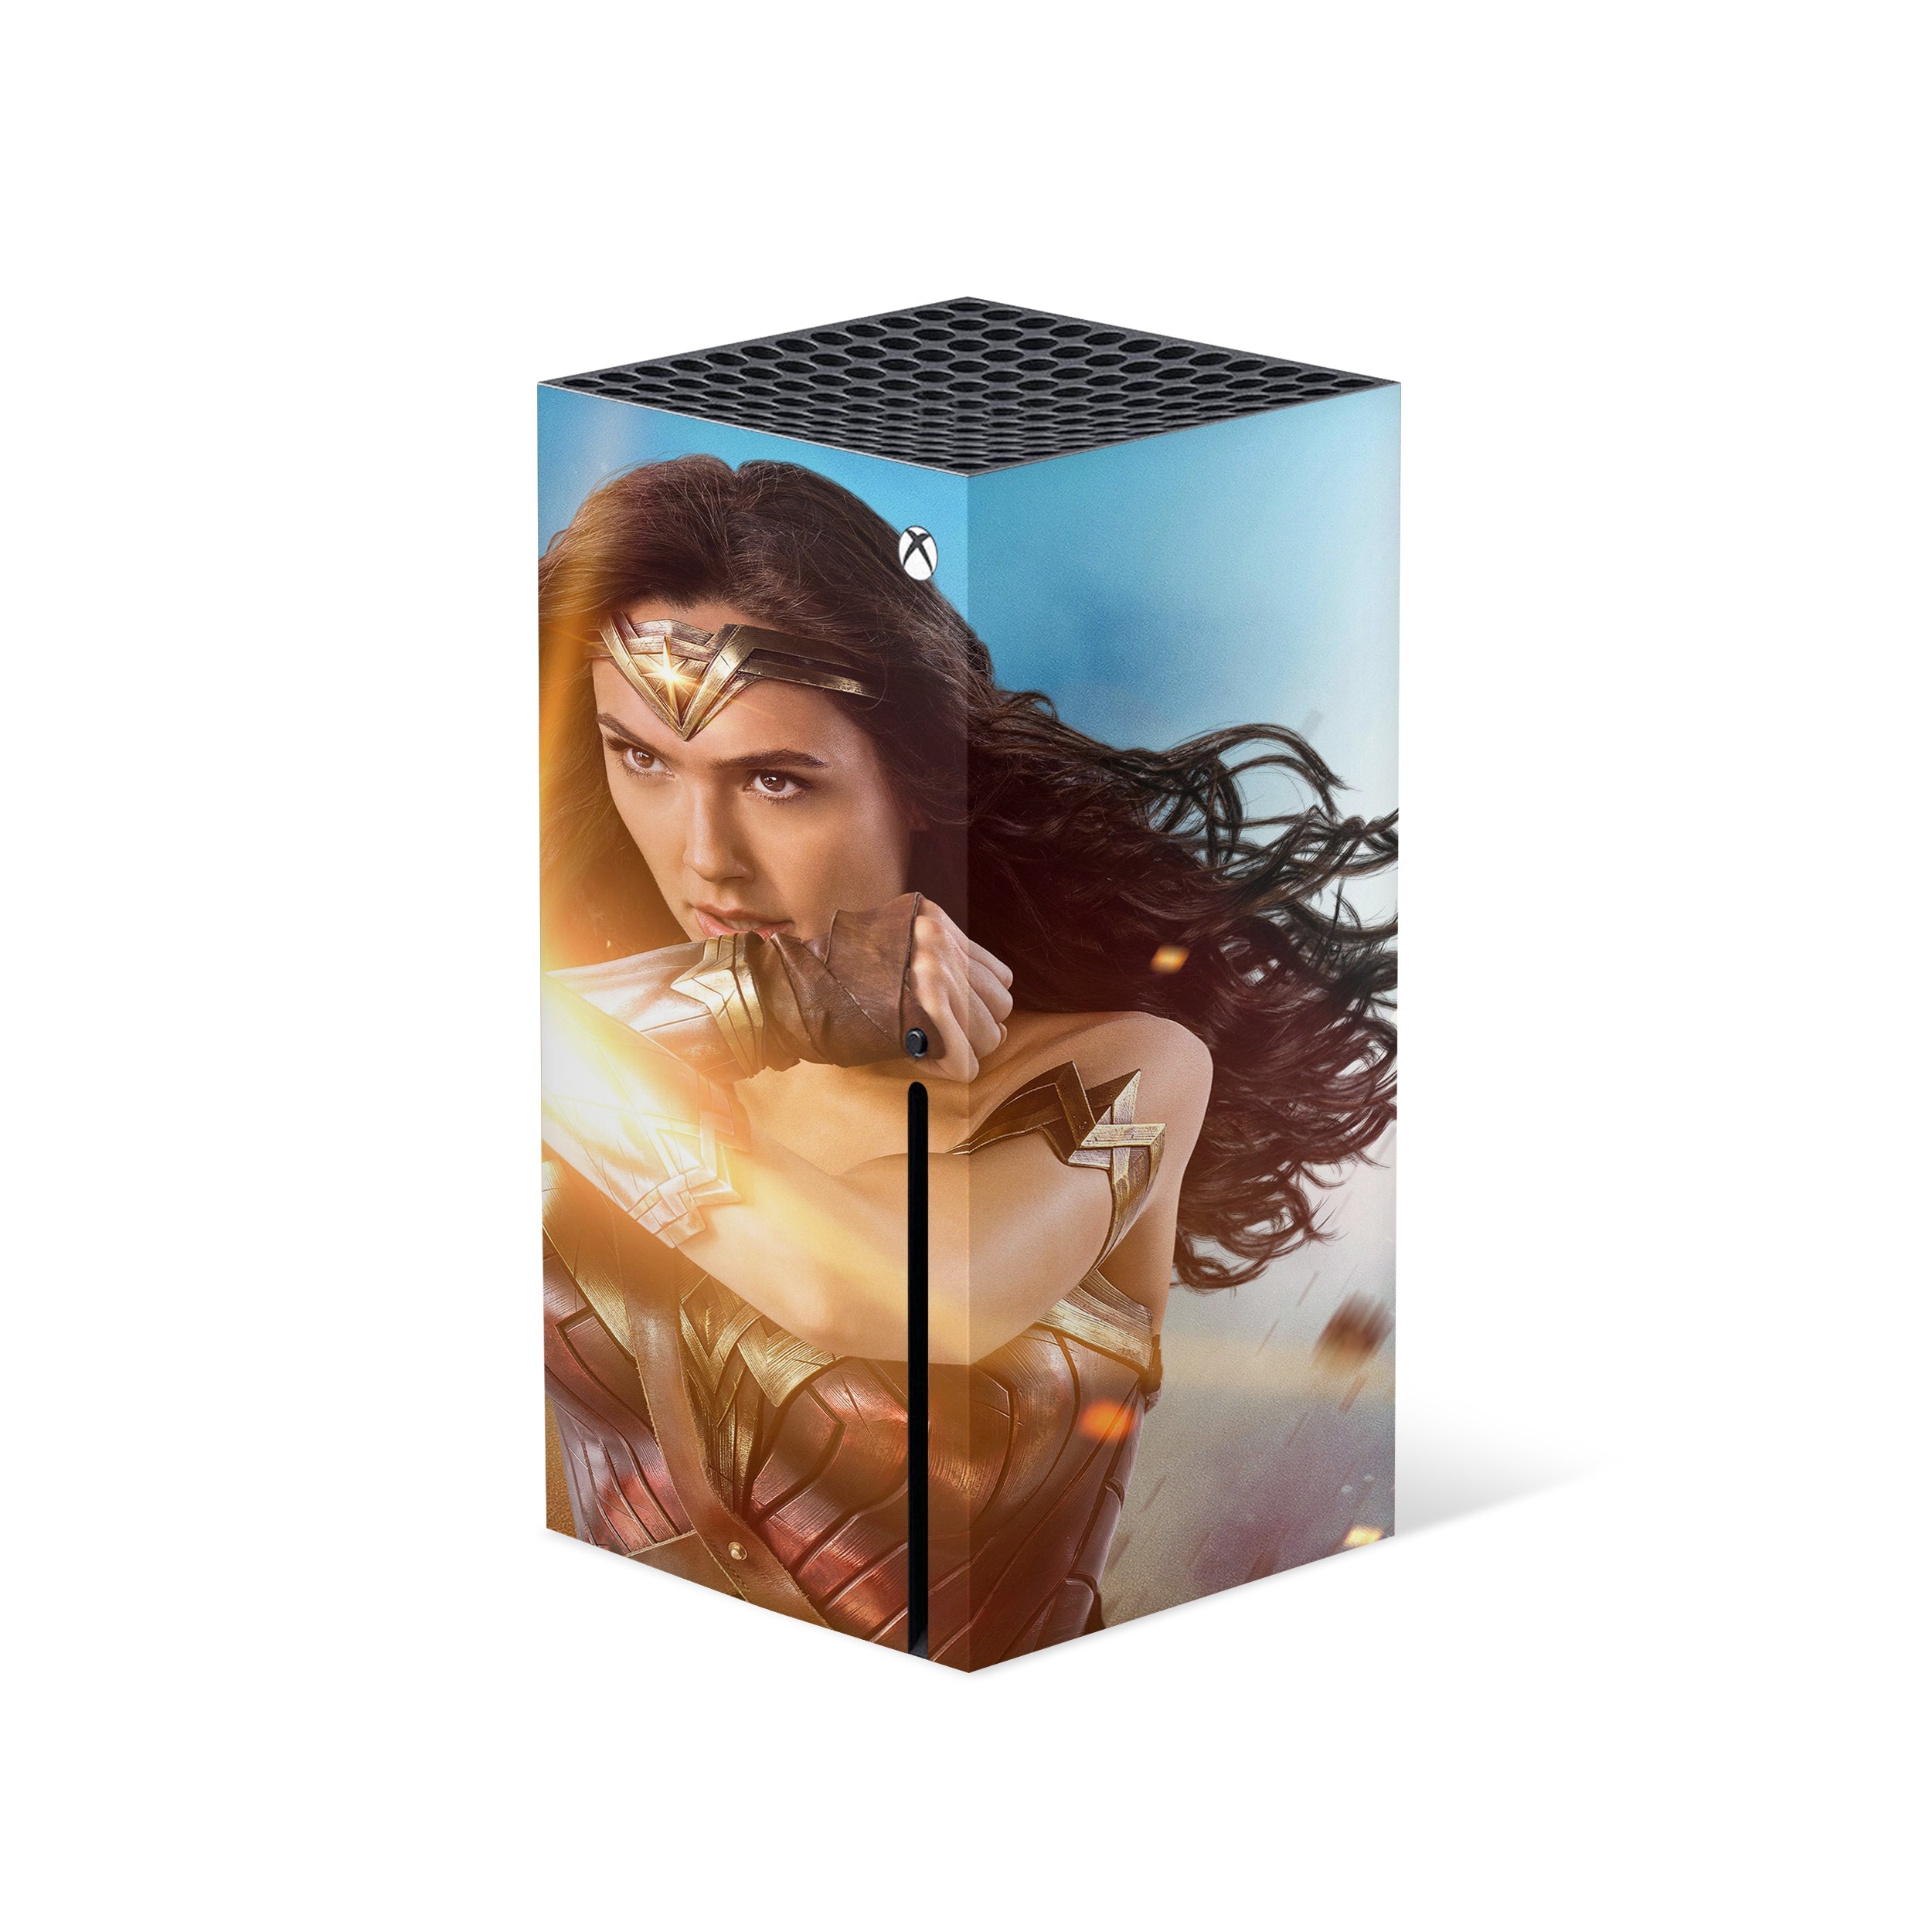 A video game skin featuring a DC Wonder Woman design for the Xbox Series X.